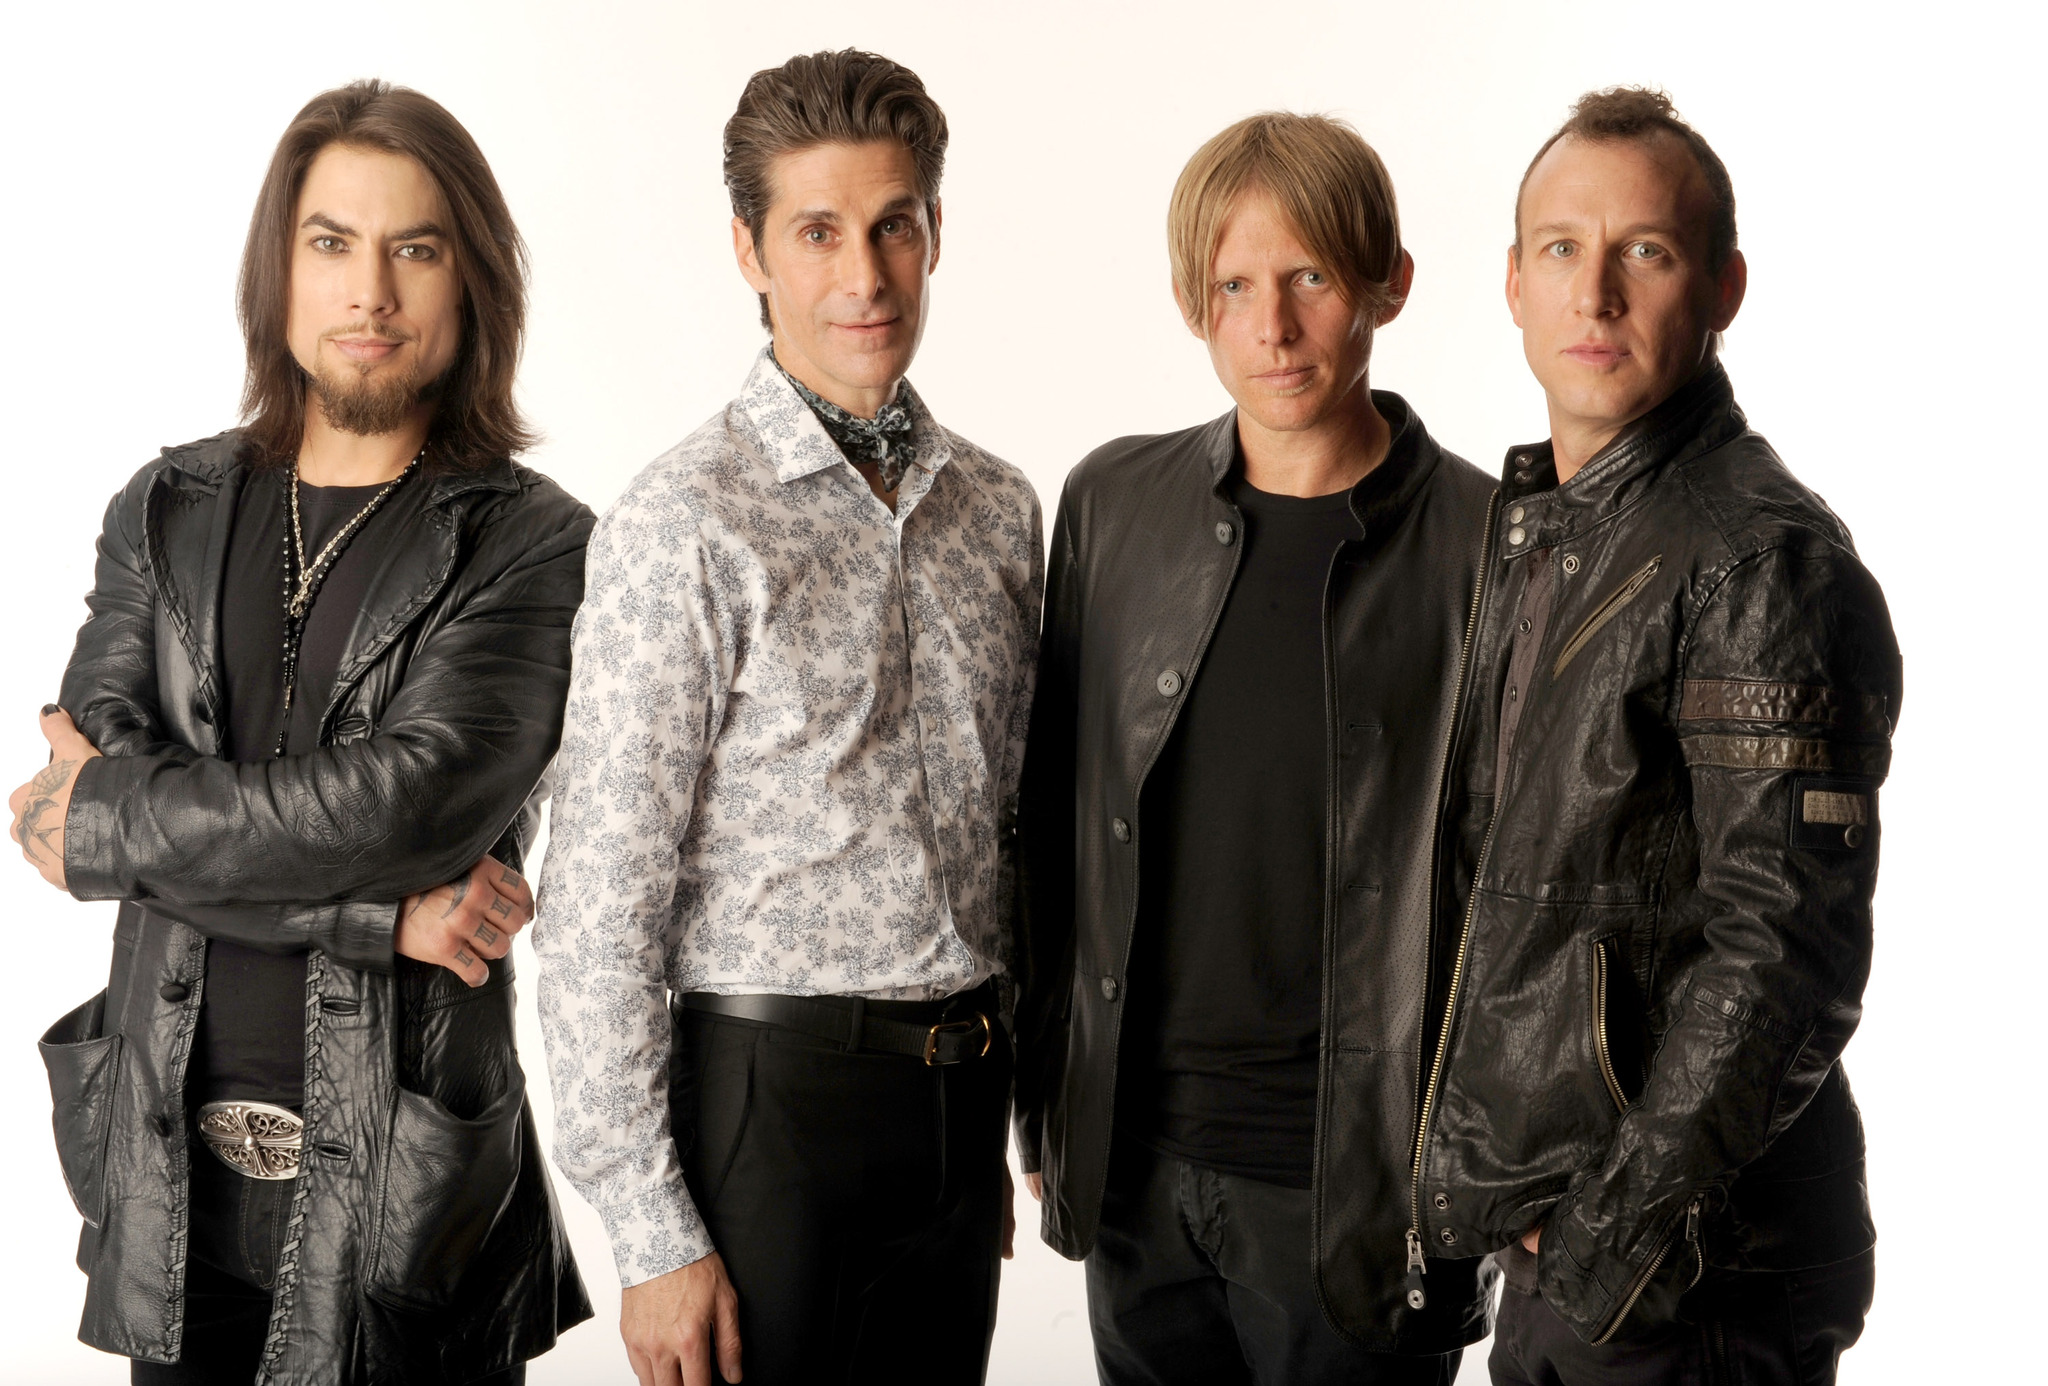 Dave Navarro, Perry Farrell, Stephen Perkins, Chris Chaney and Jane's Addiction